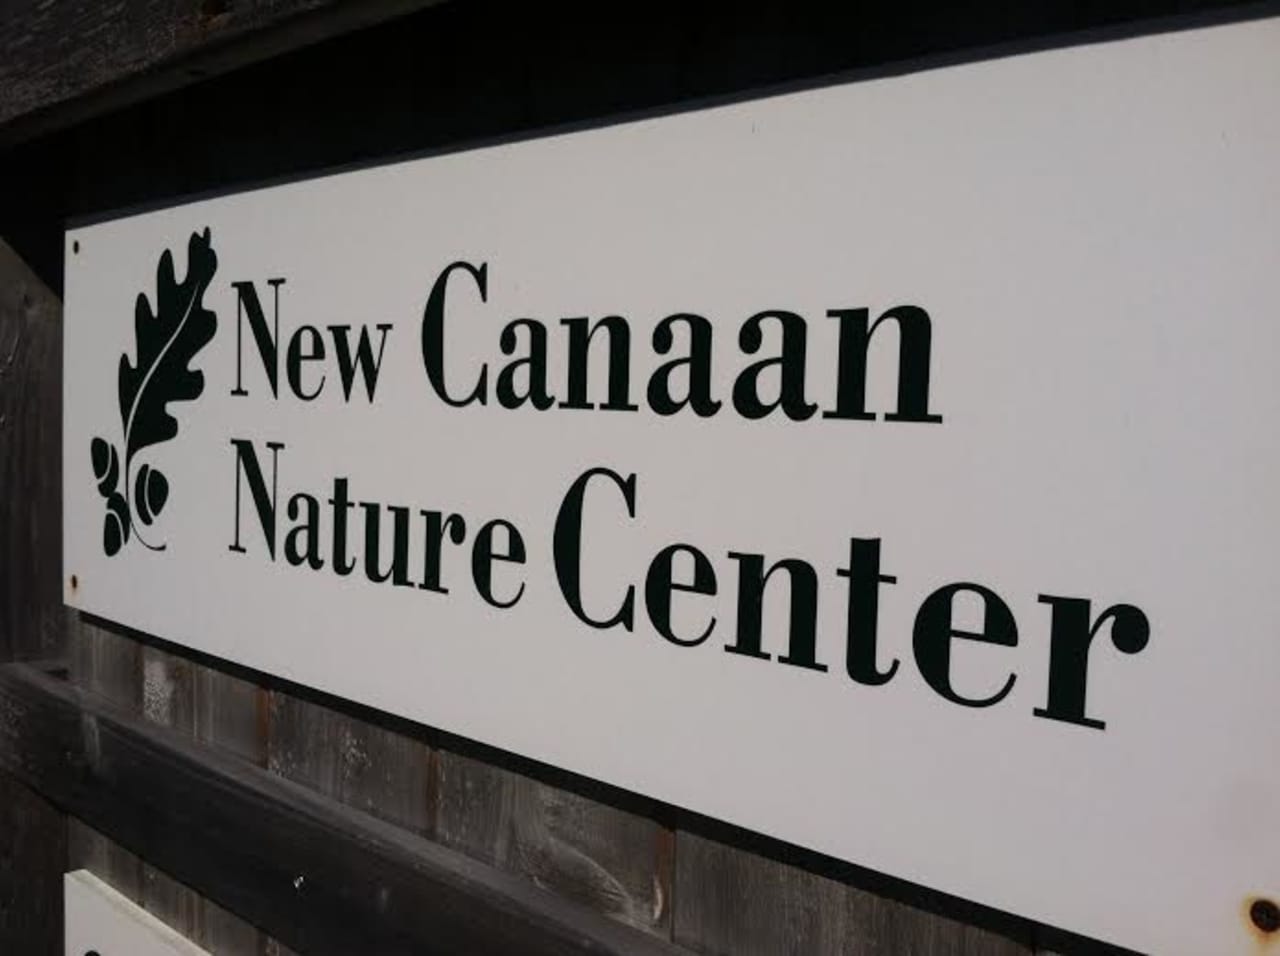 New Canaan will proclaim it Earth Day at noon Tuesday at the Visitors Center at the Nature Center. It is located at 144 Oenoke Ridge.